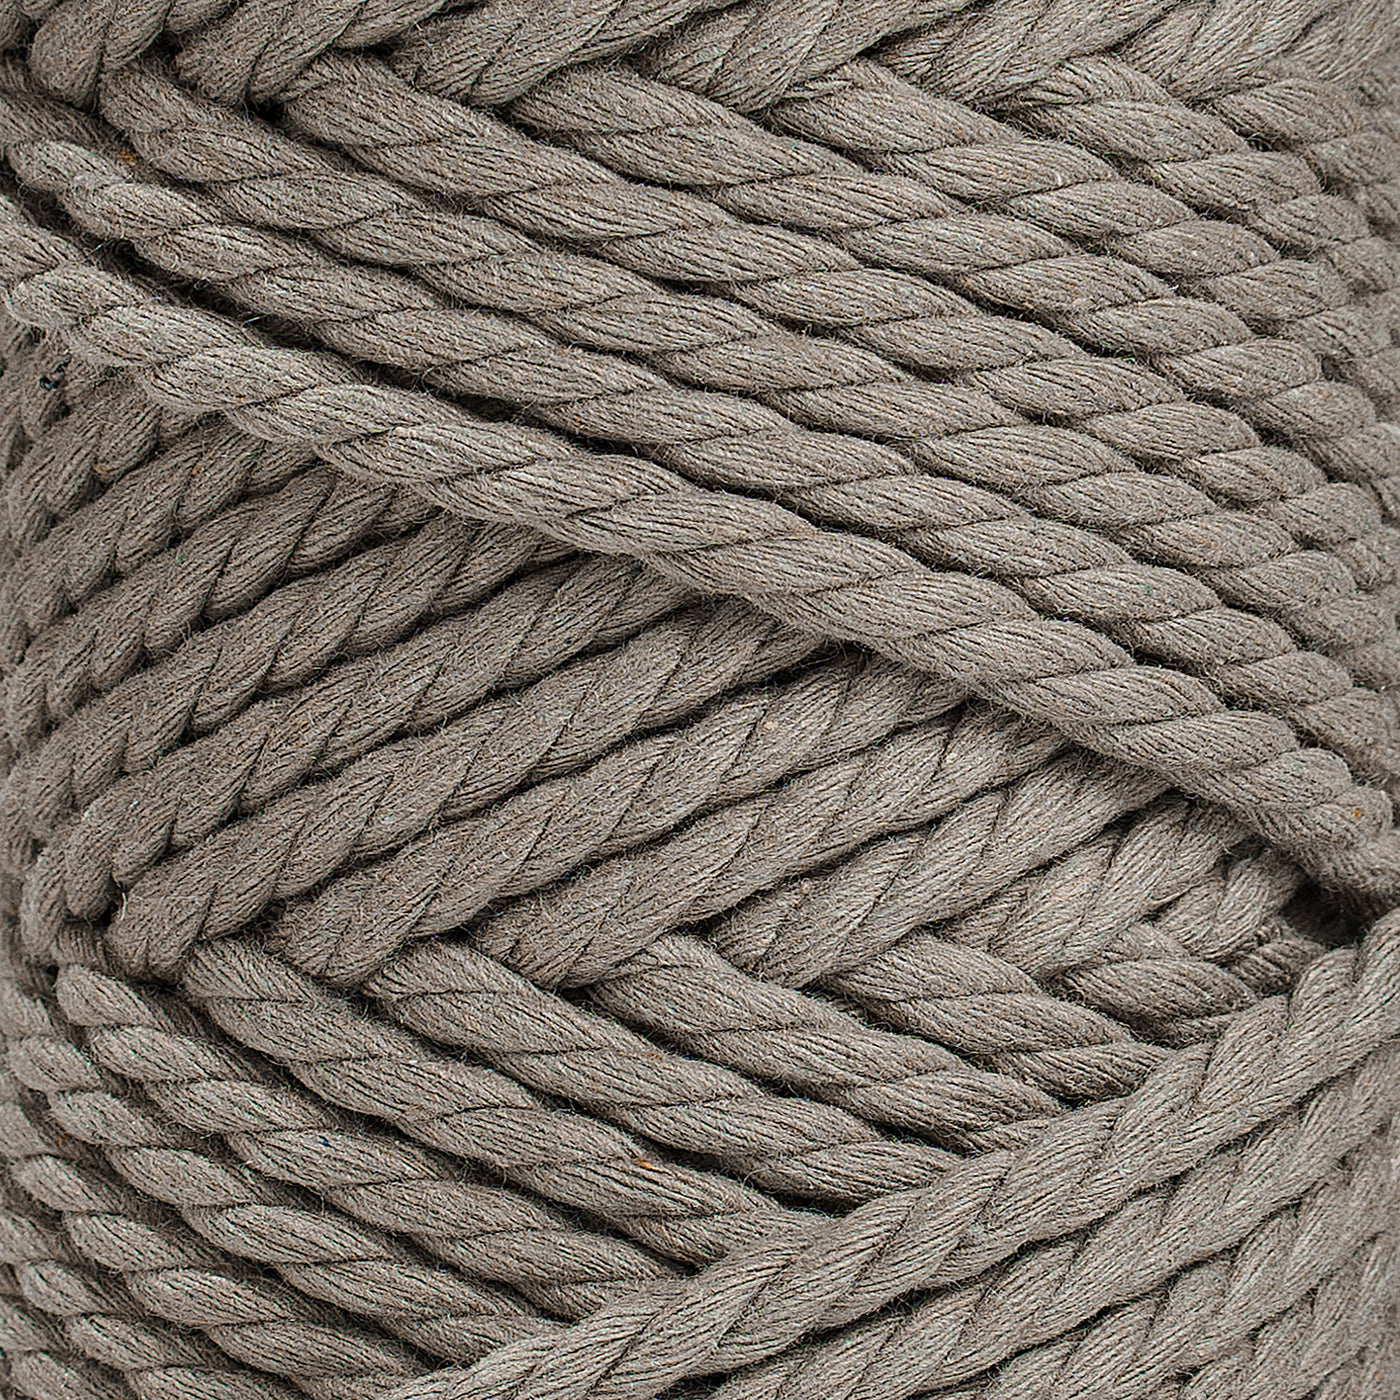 COTTON ROPE ZERO WASTE 5 MM - 3 PLY - CHESTNUT COLOR